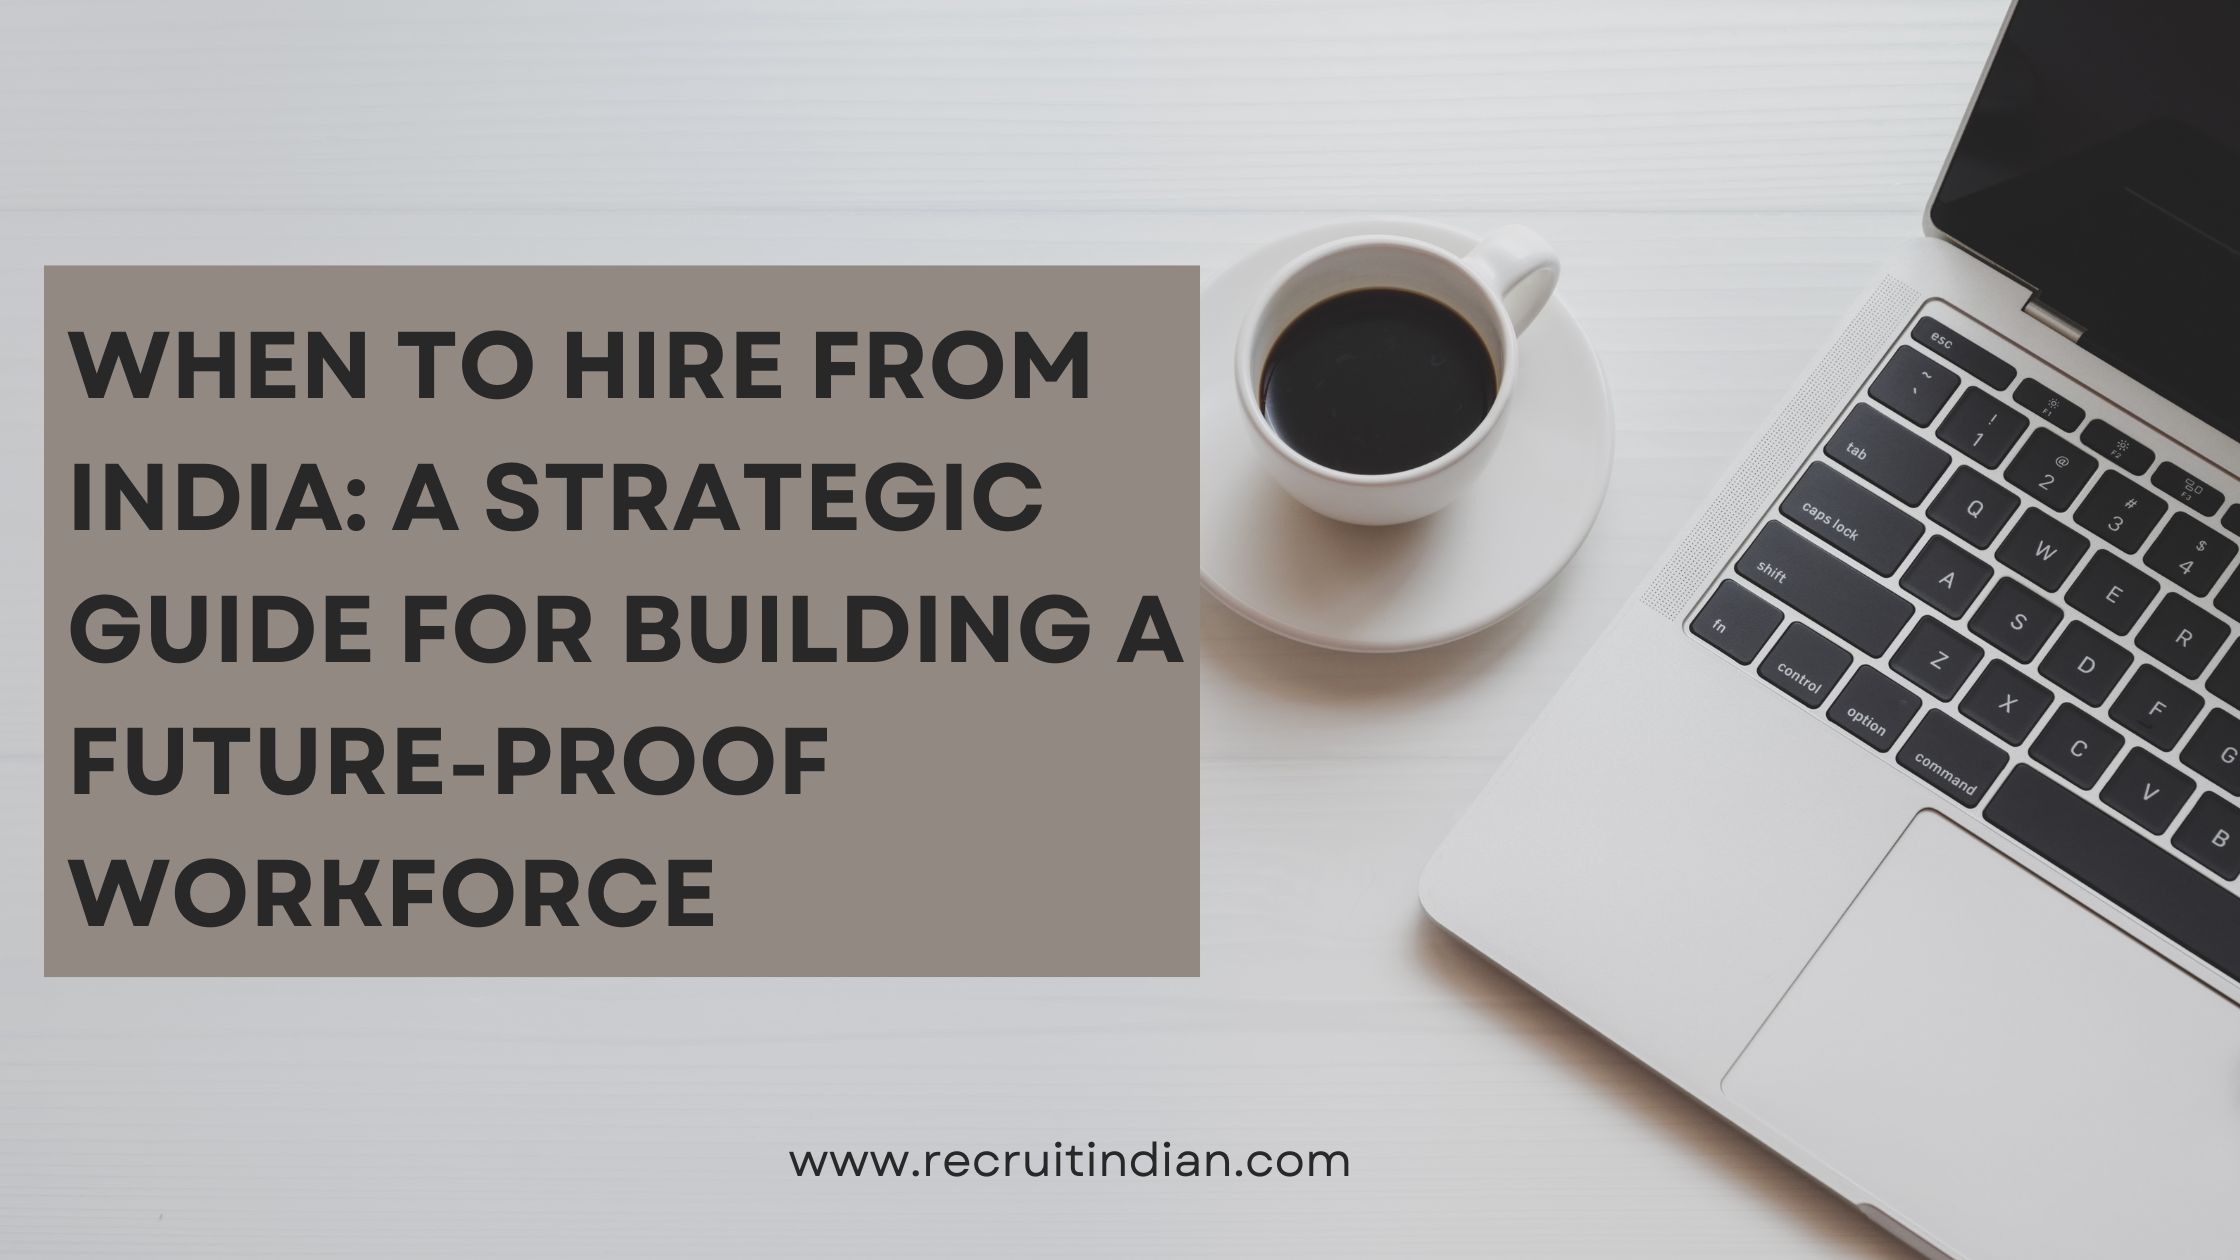 When to Hire from India: A Strategic Guide for Building a Future-Proof Workforce